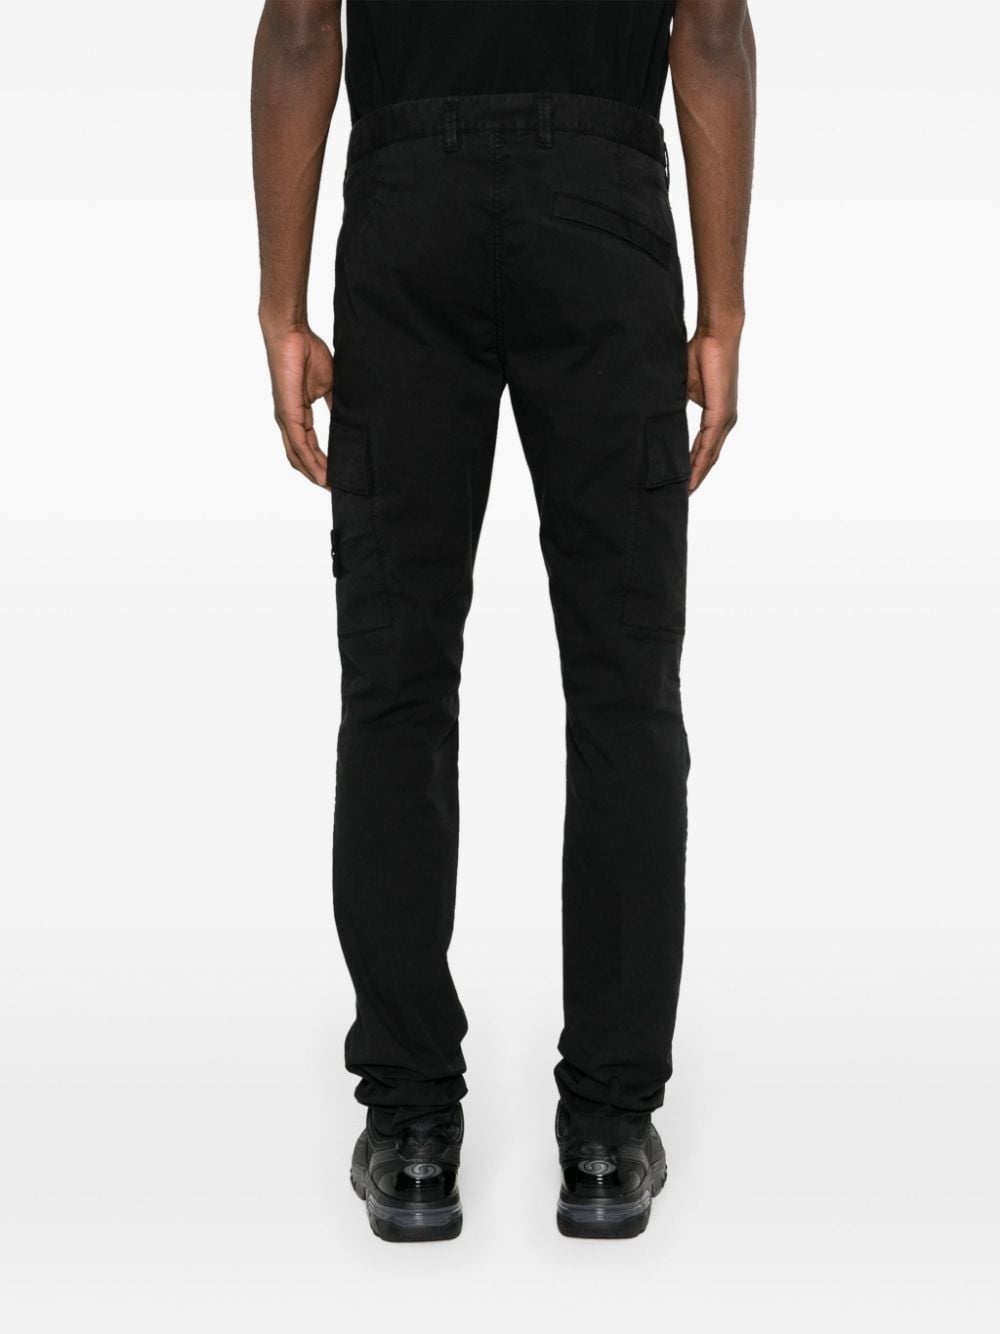 Compass-badge tapered trousers - 4